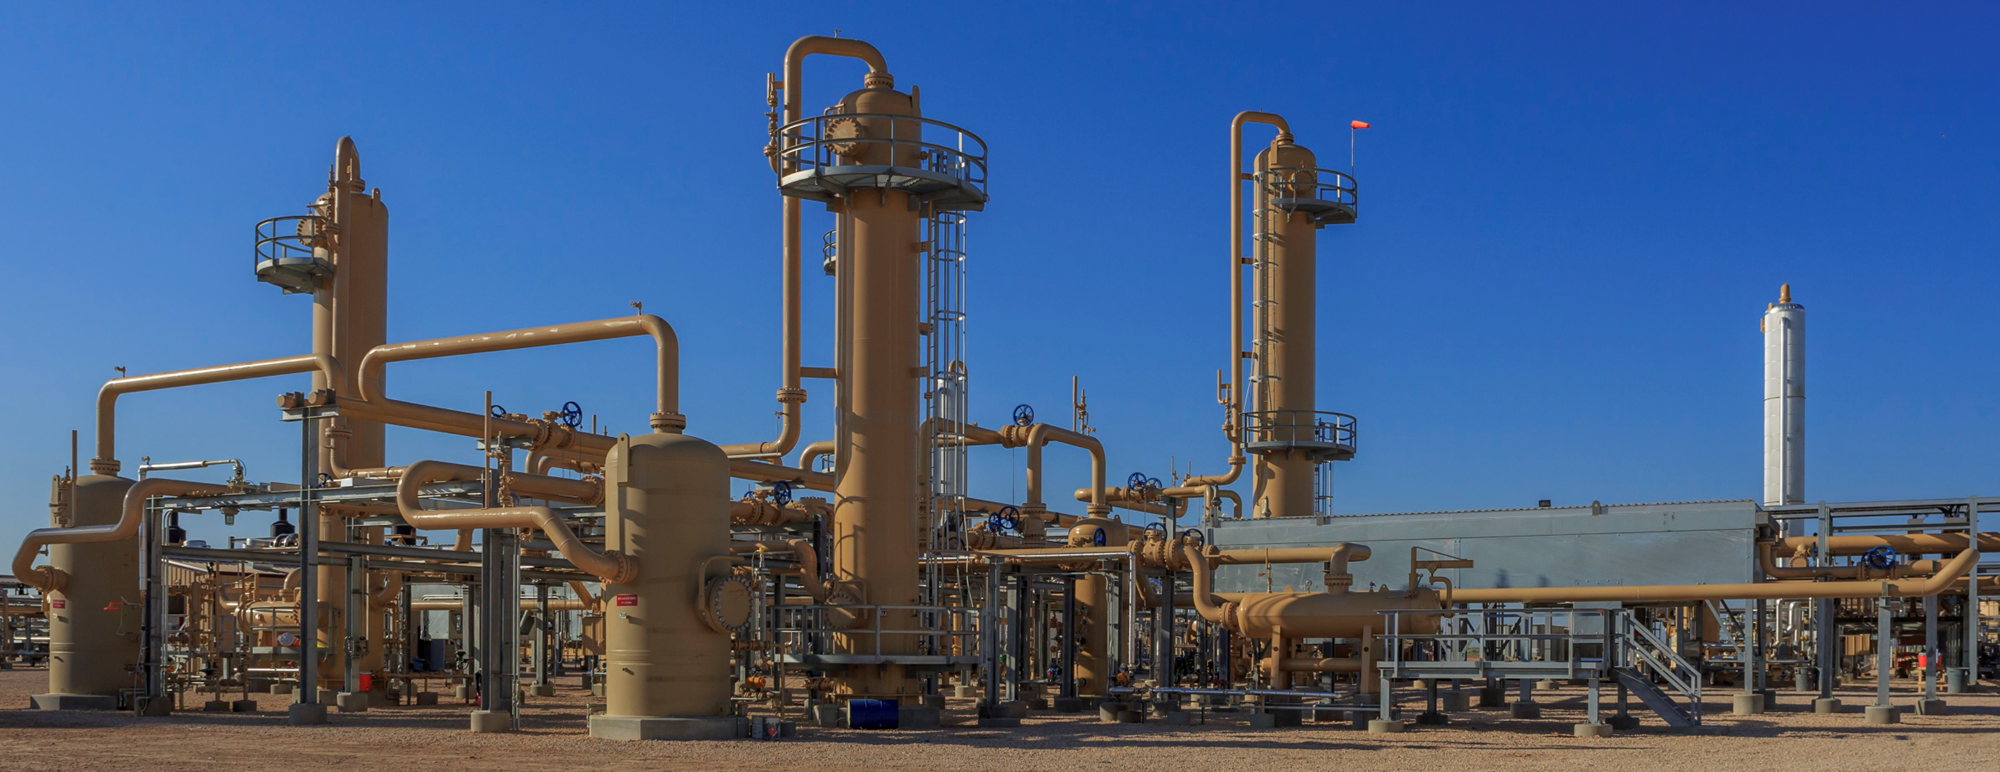 Gas Processing . Two (2) 400 GPM Amine Treaters, Two (2) 2.5 MMBtu_Hr. TEG Dehydrators, One (1) 5,000 BBL_D Condensate Stabiliz